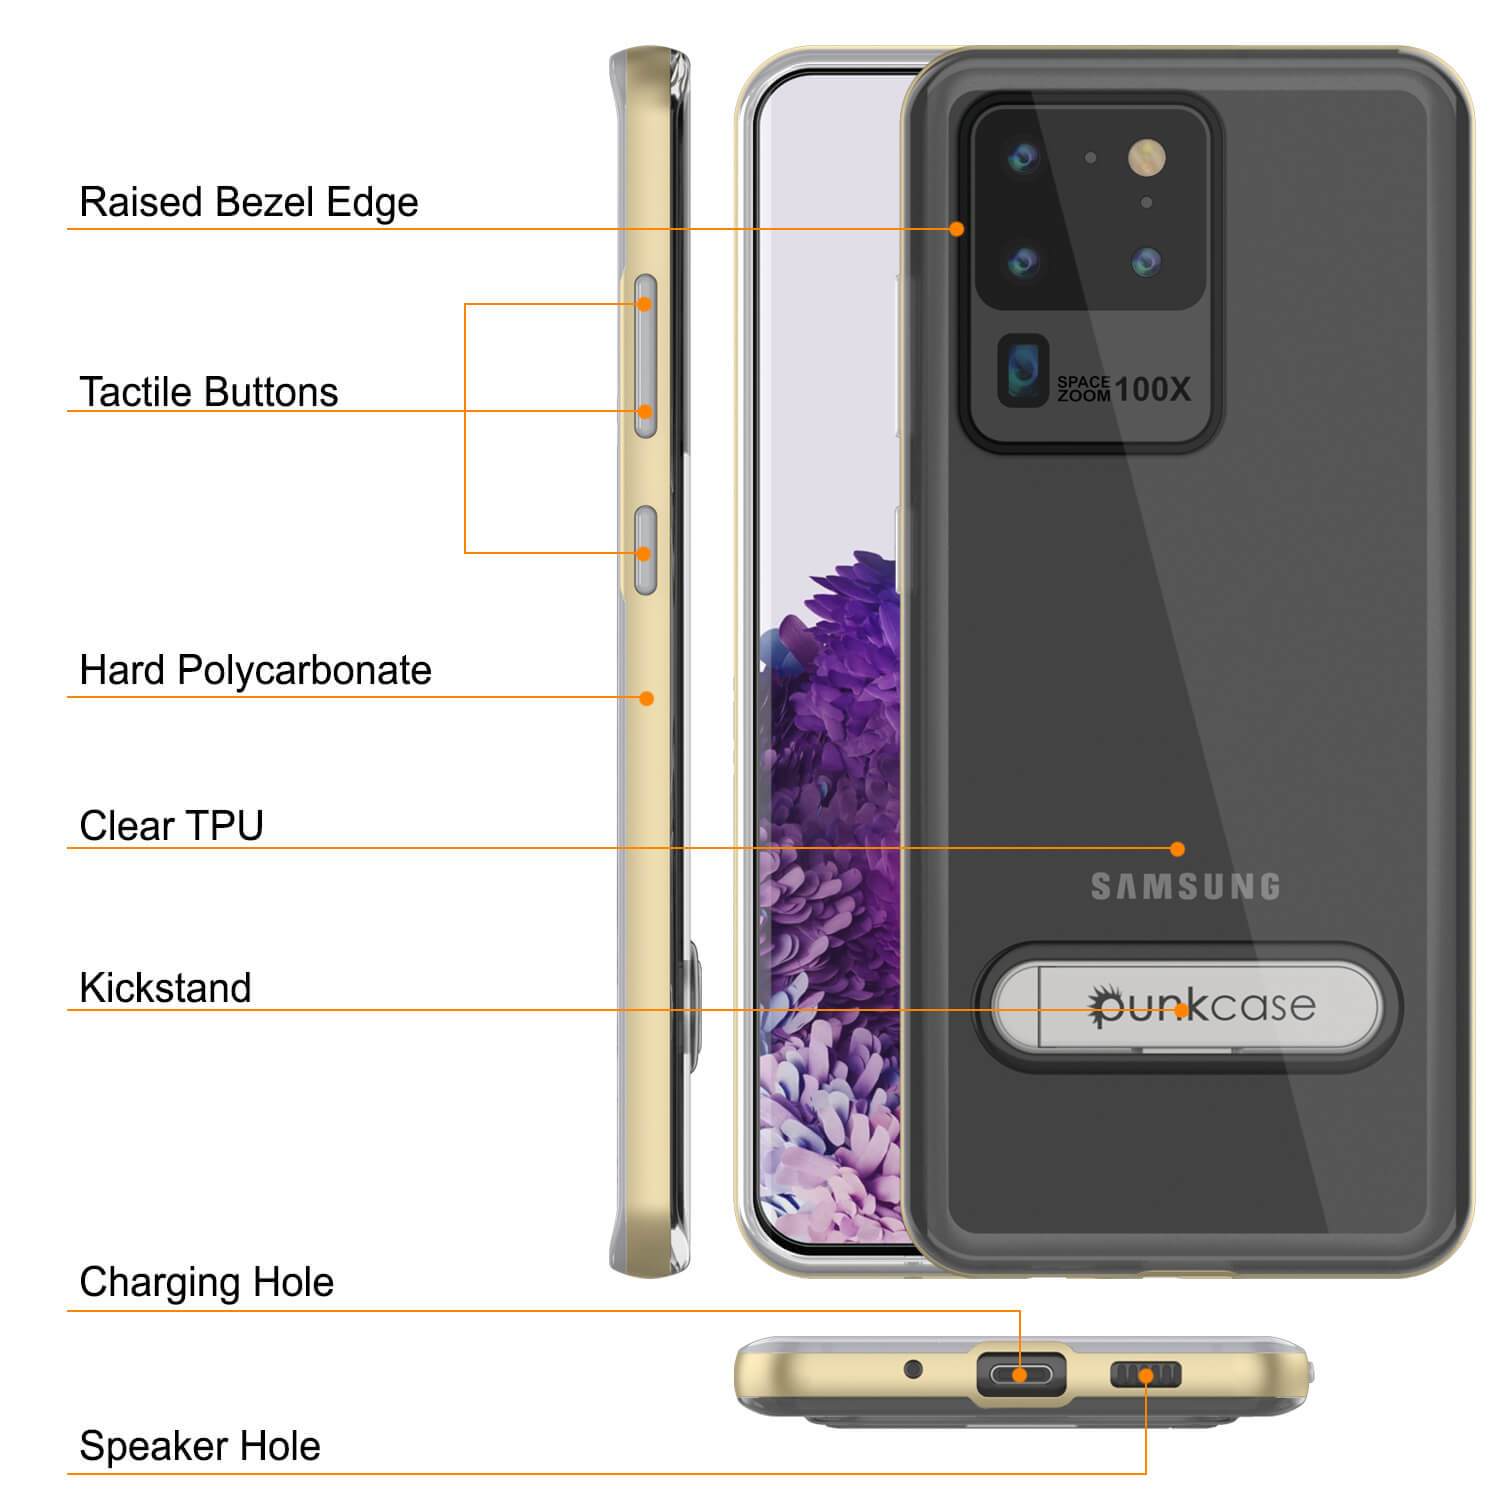 Galaxy S20 Ultra Case, PUNKcase [LUCID 3.0 Series] [Slim Fit] Armor Cover w/ Integrated Screen Protector [Gold]